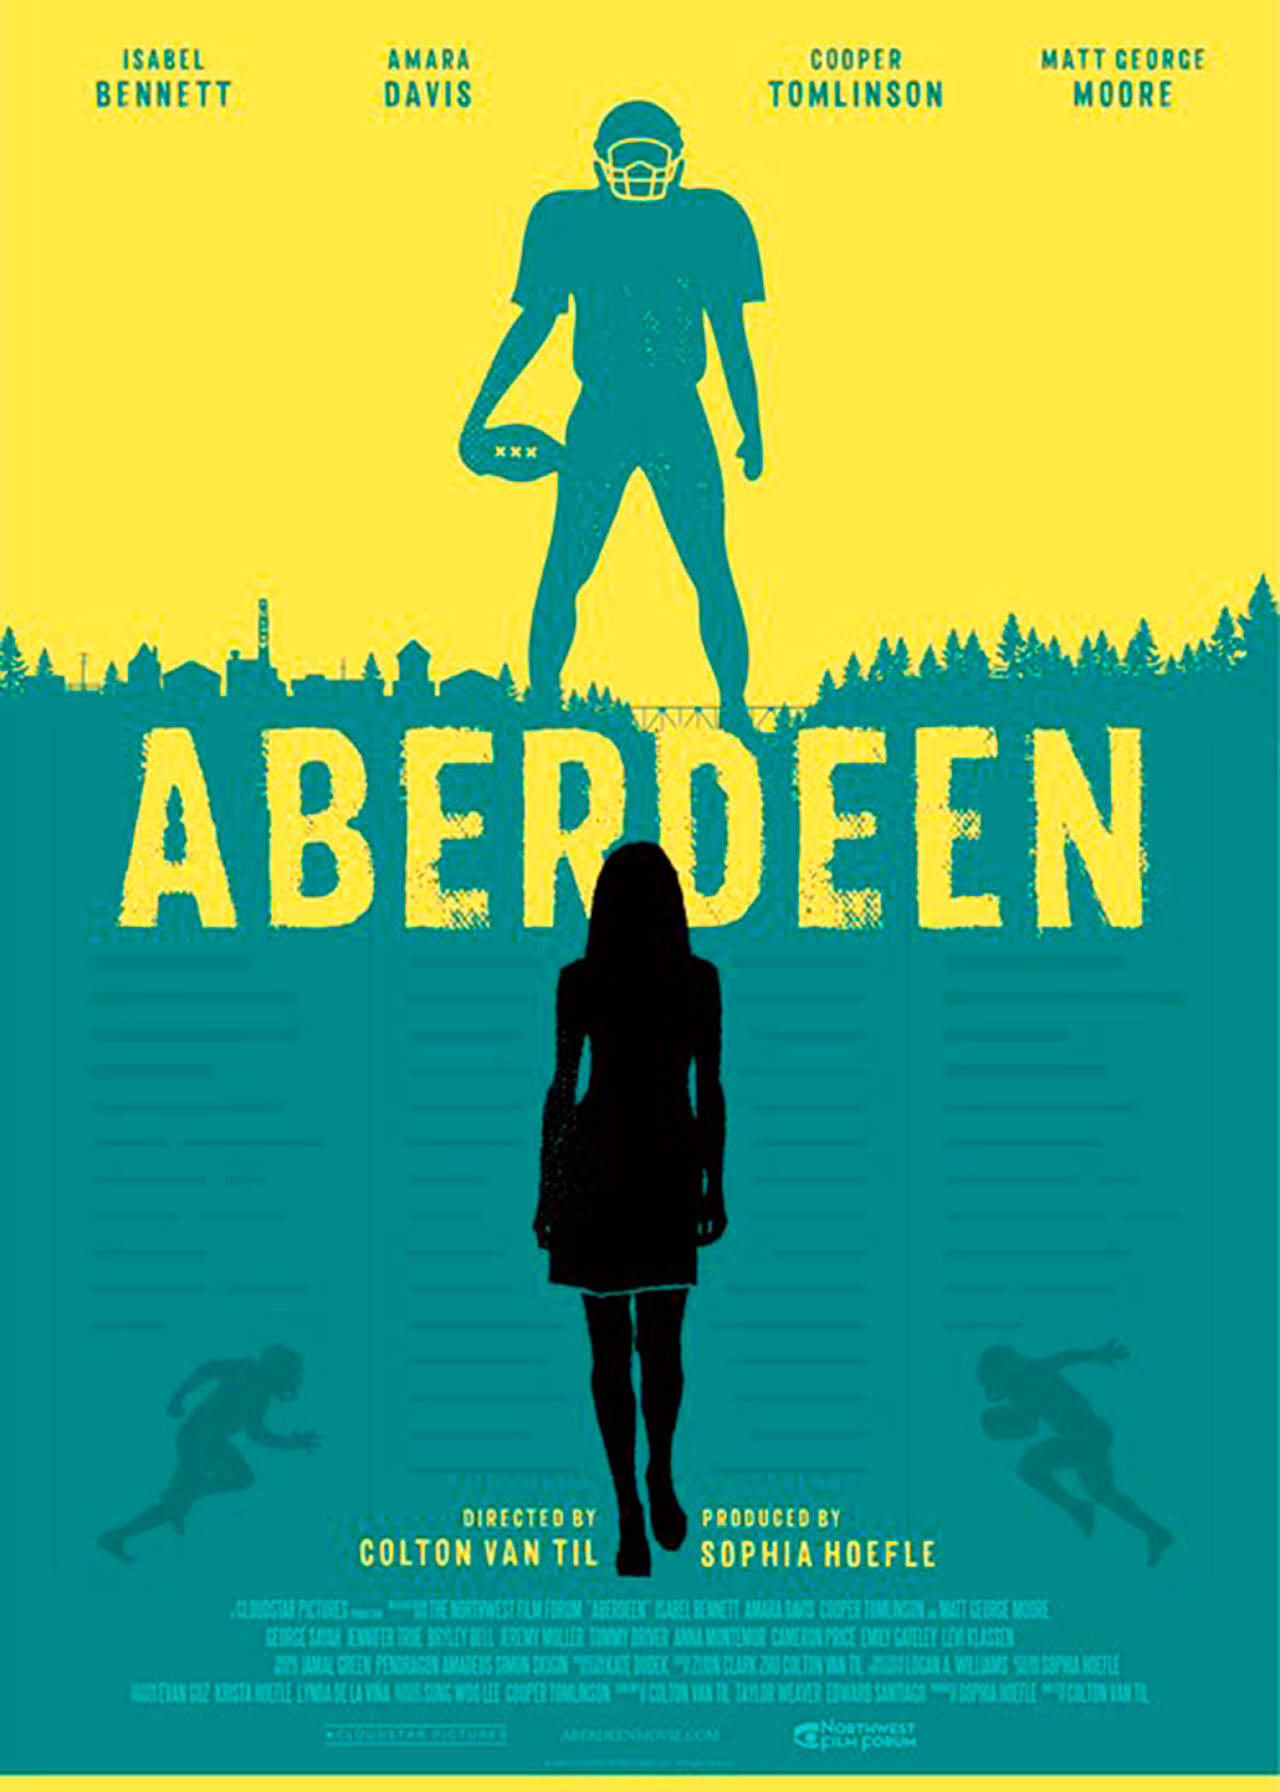 “Aberdeen” will be shown at 6 p.m. Saturday at the D&R Theatre.